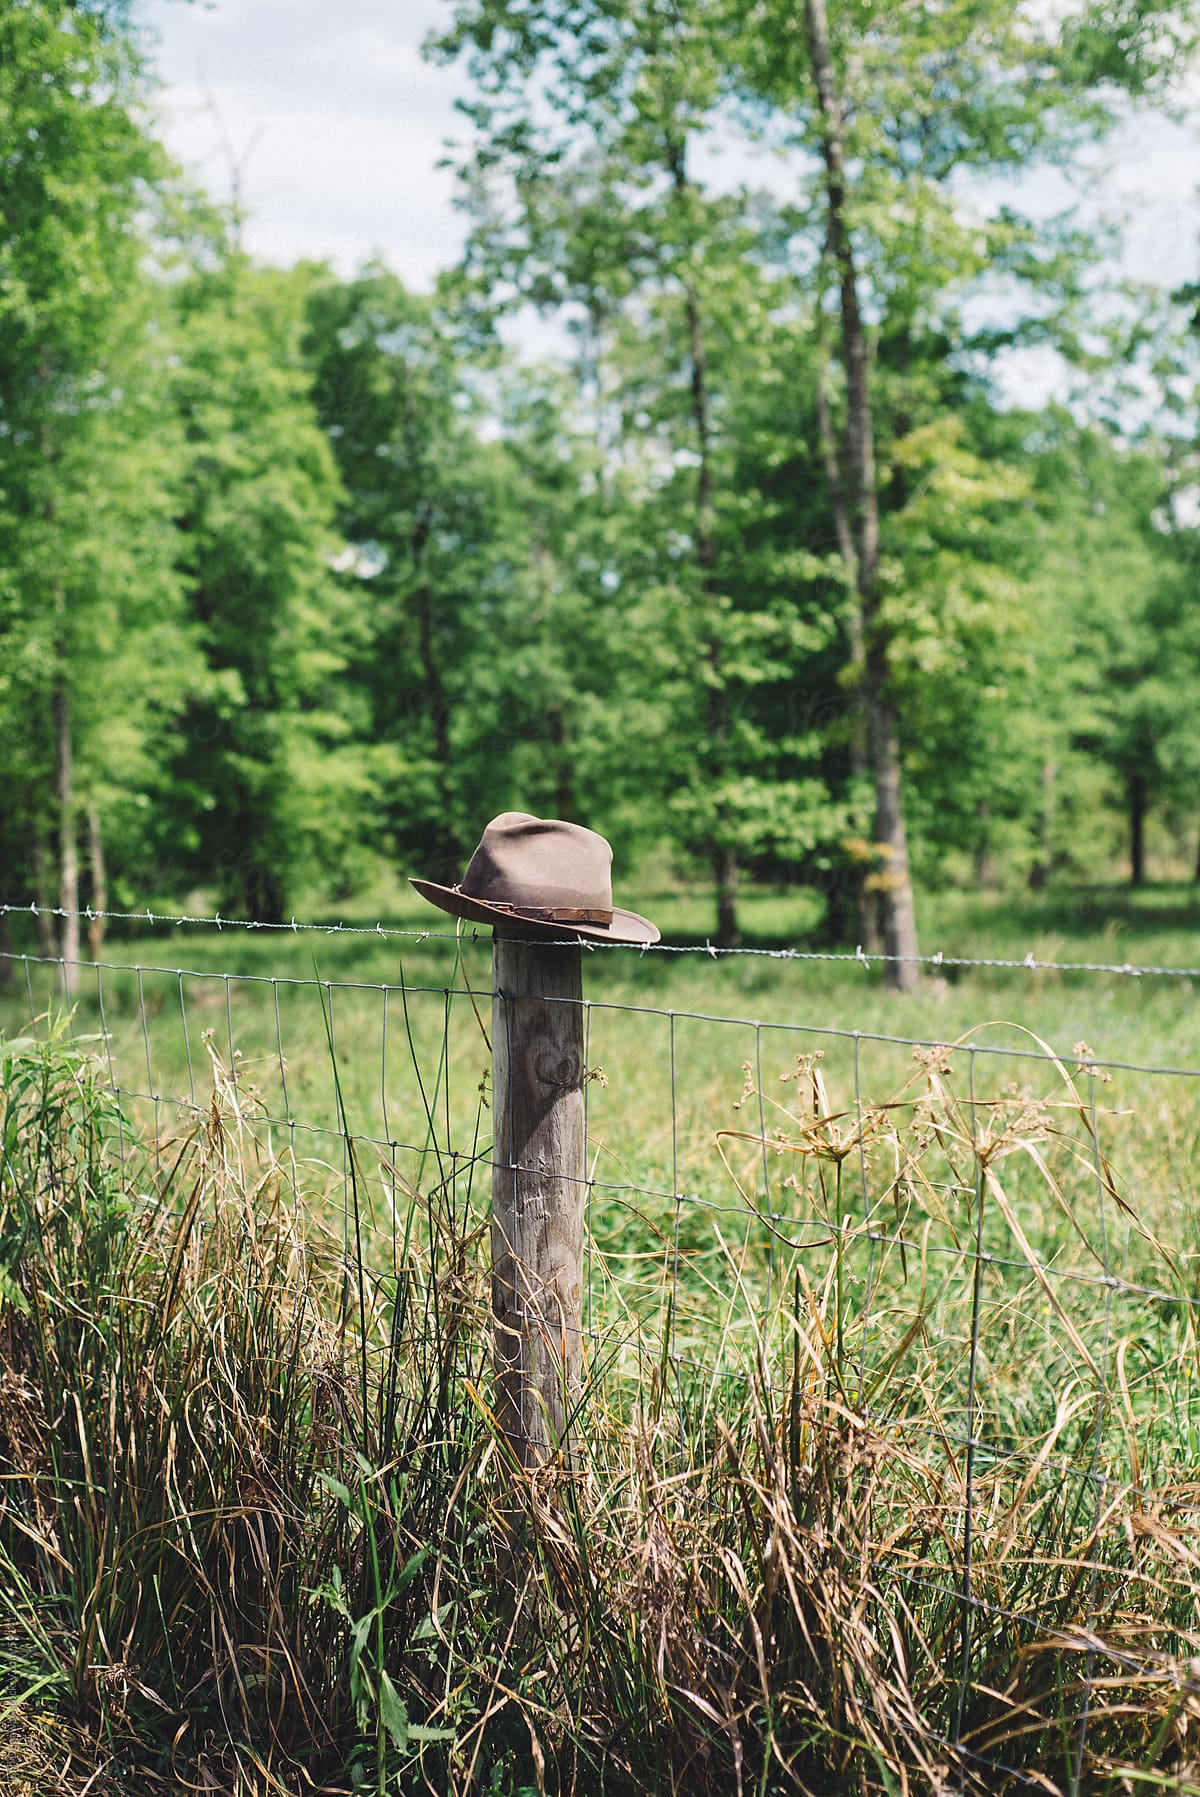 Lone Hat on the Fence